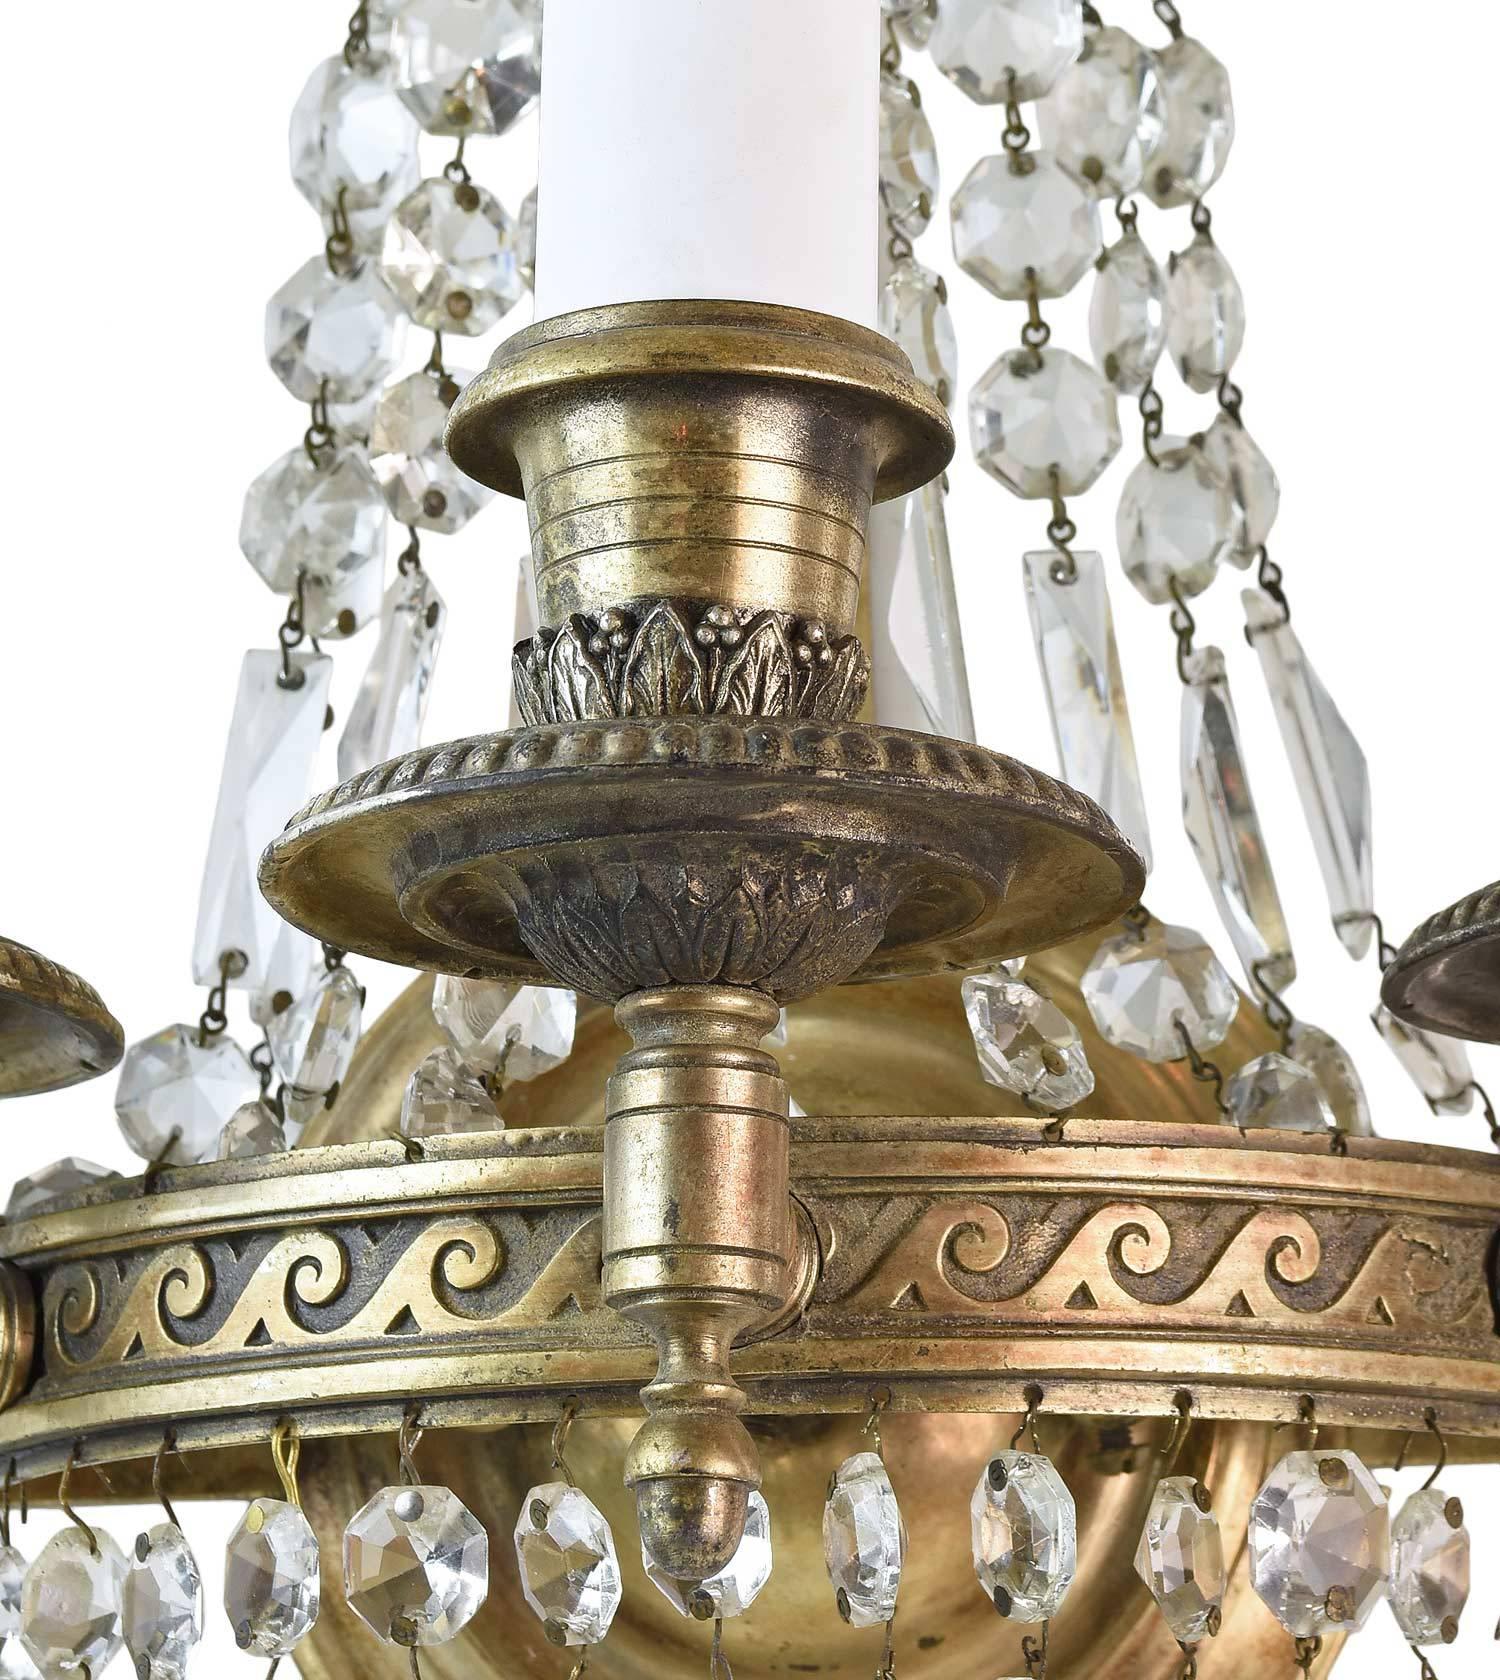 A neoclassical design from the 1930s, this is a stunning over-sized three-candle cast brass sconce with decorative crystals along the back and bottom. The sconce has ornamentation throughout, with  scroll details in cast brass, leaf detail, and an